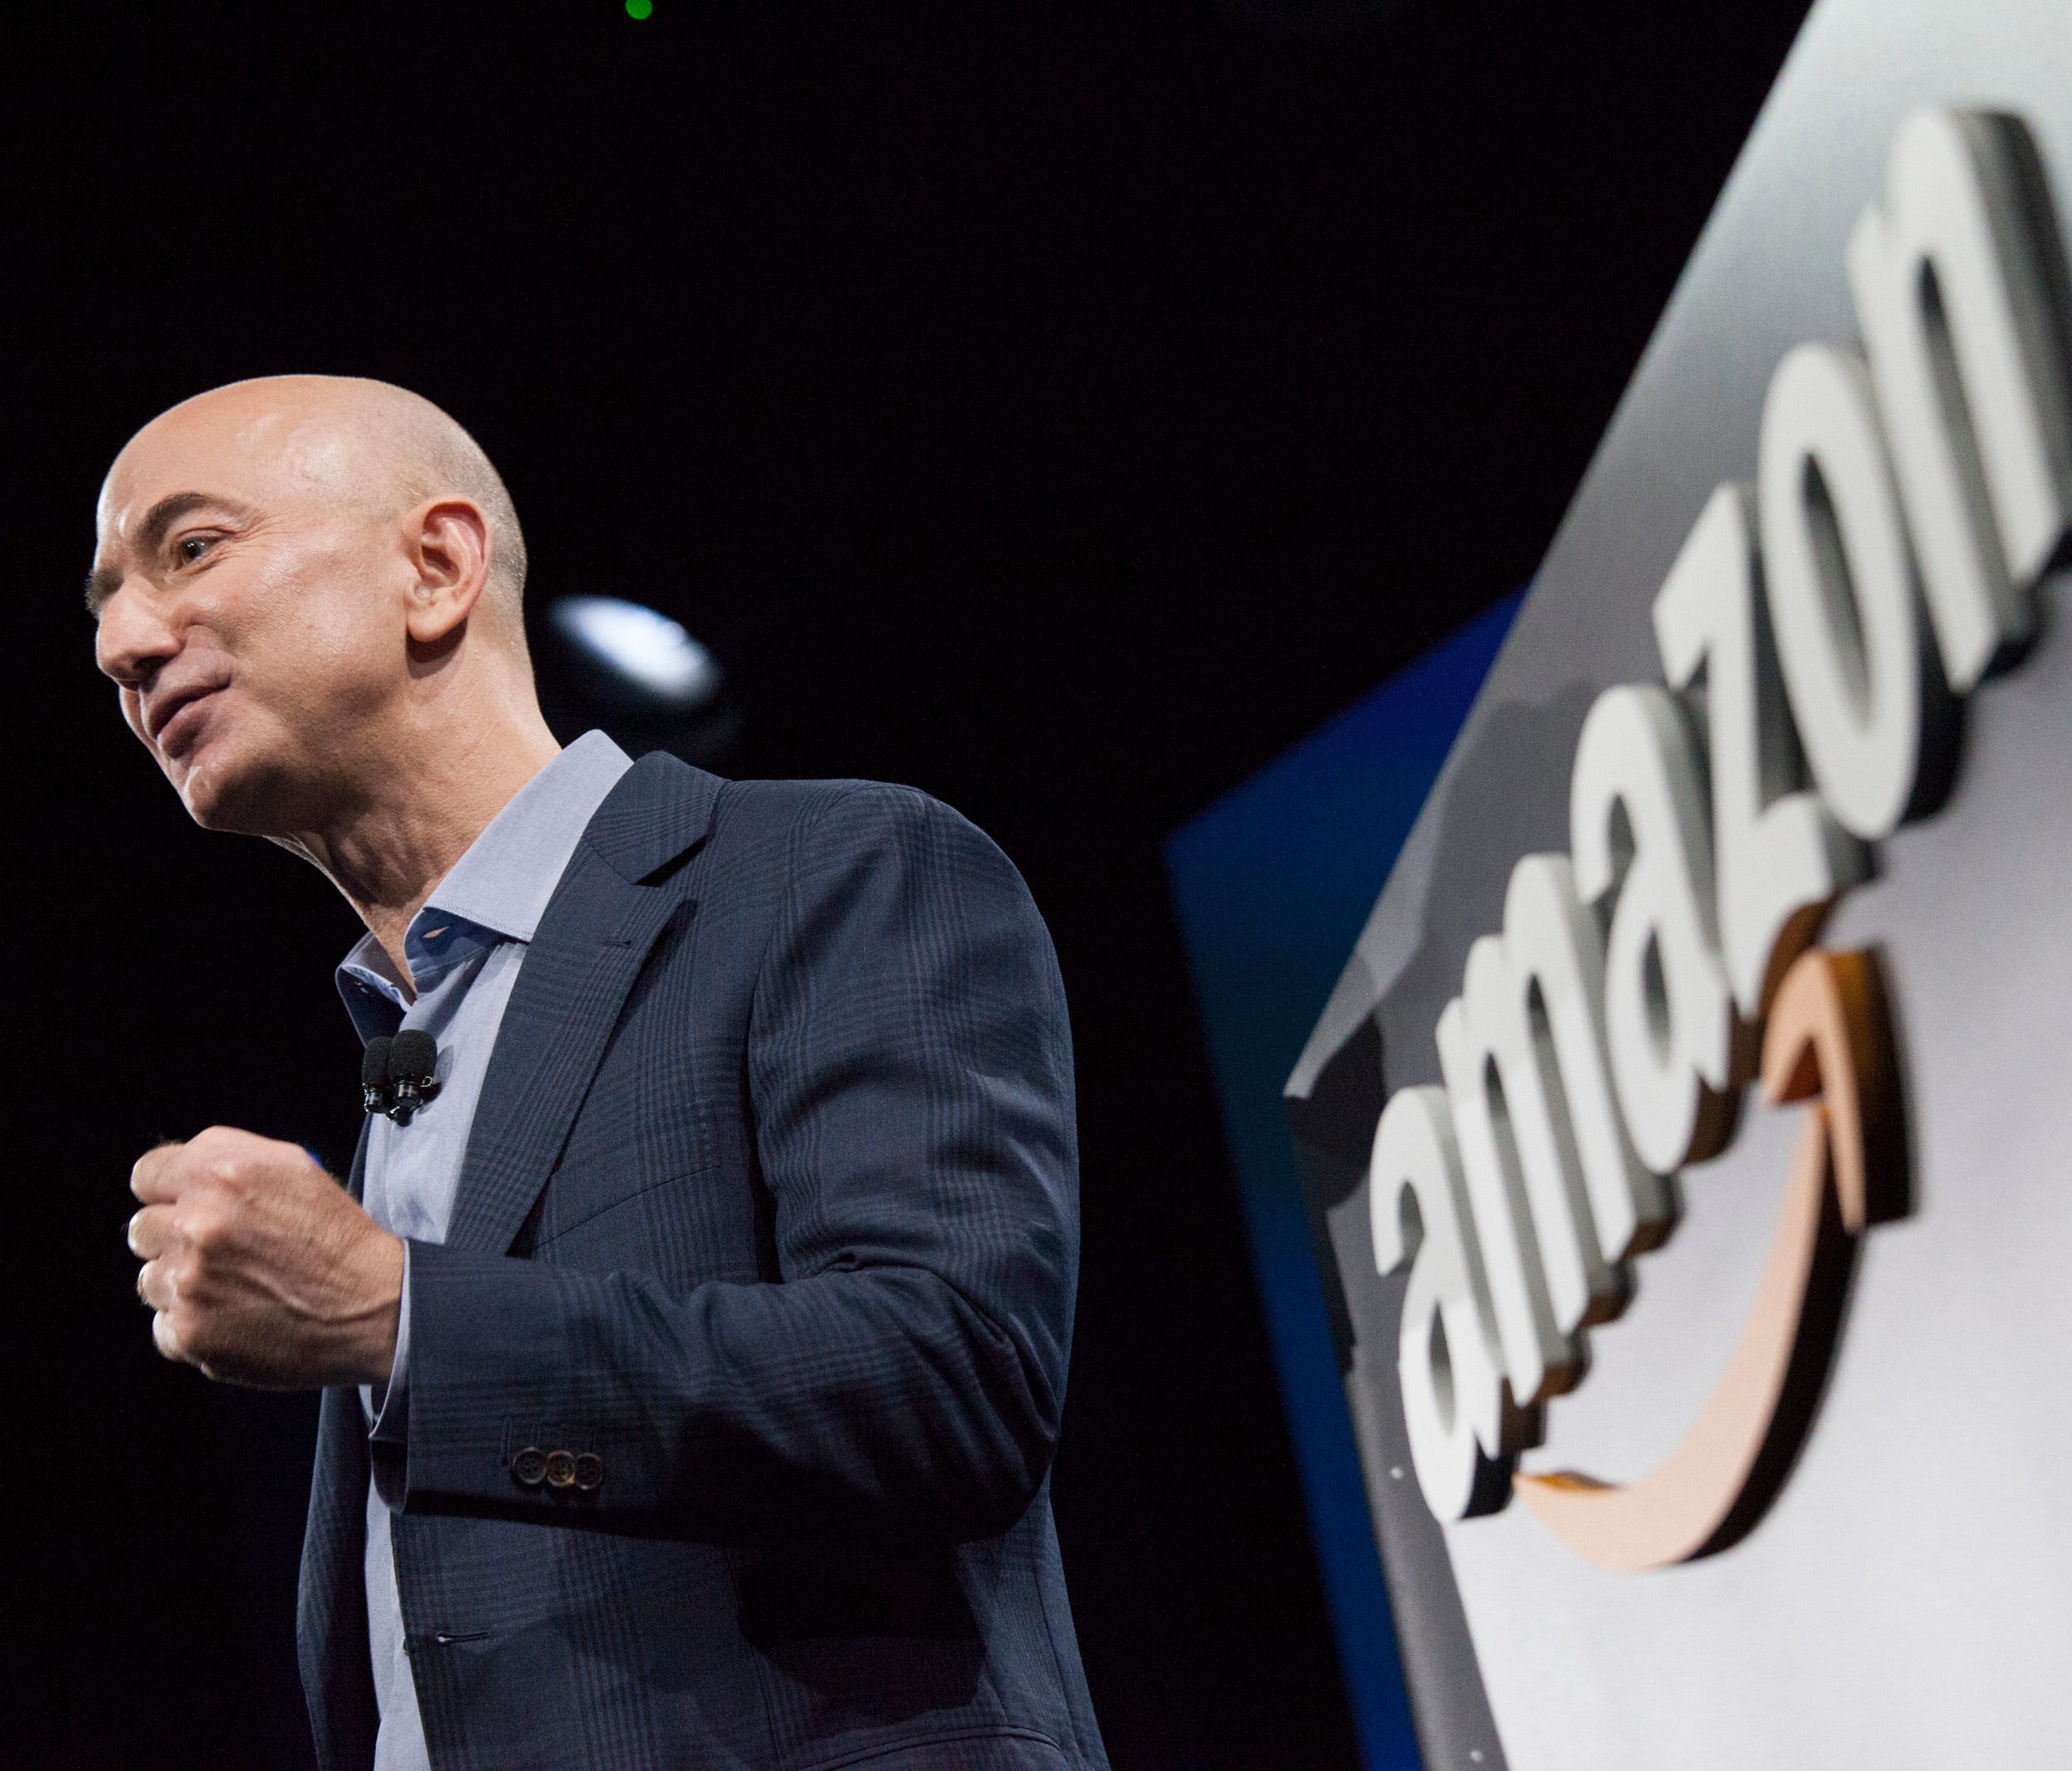 Amazon.com founder and CEO Jeff Bezos presents the company's first smartphone, the Fire Phone, on June 18, 2014 in Seattle. On June 16, 2017, Amazon announced it was purchasing Whole Foods.